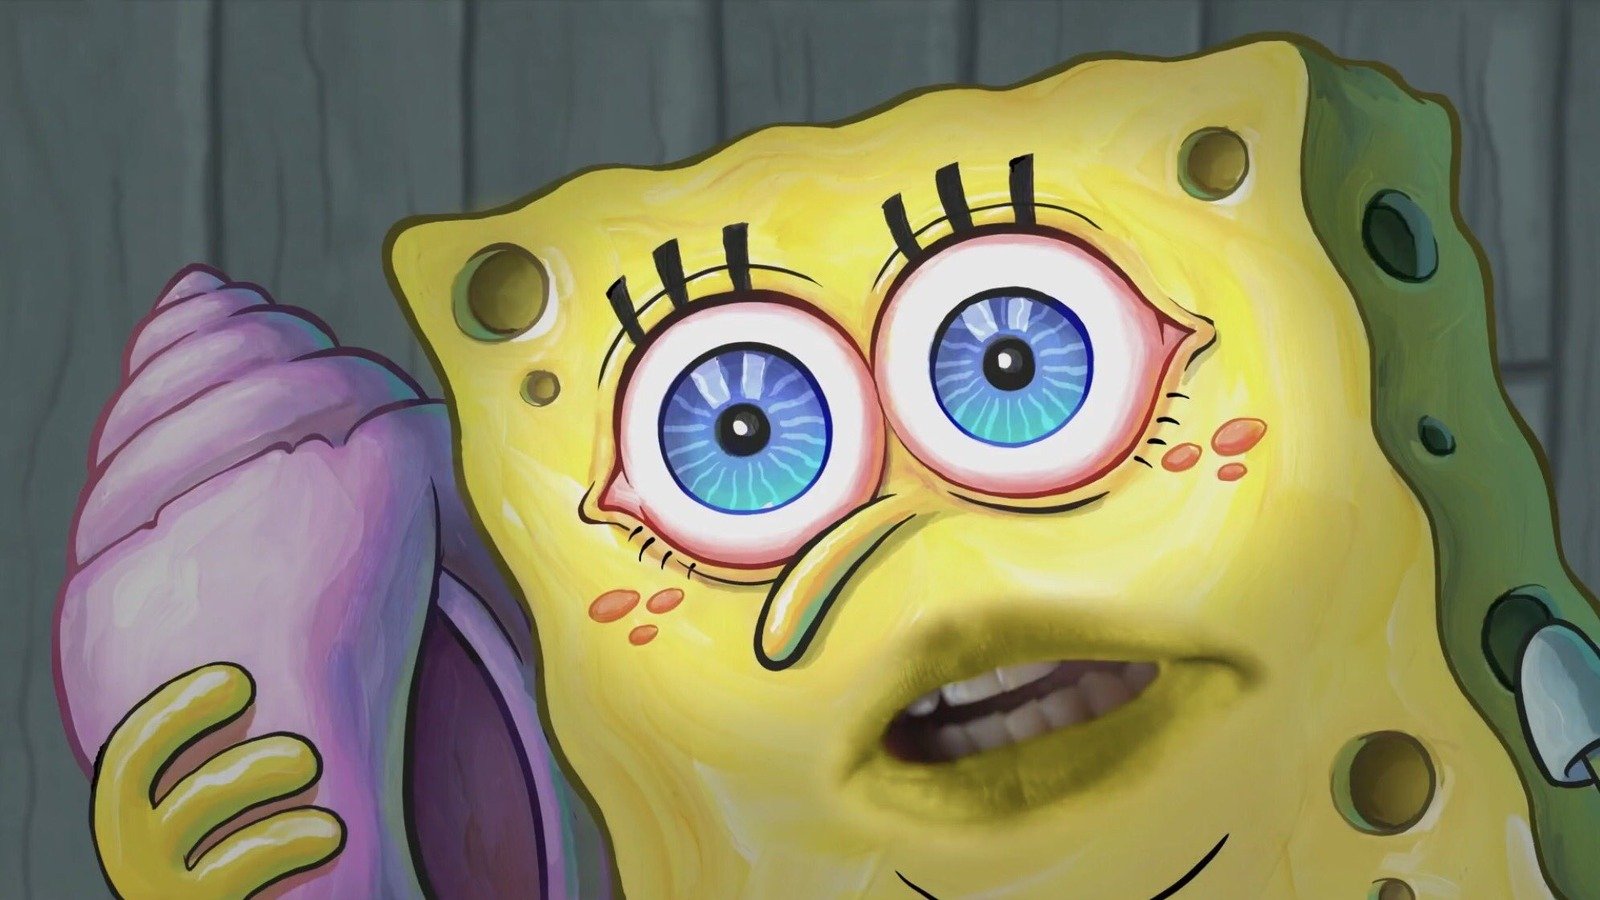 The SpongeBob SquarePants Details That Are Darker Than You Think